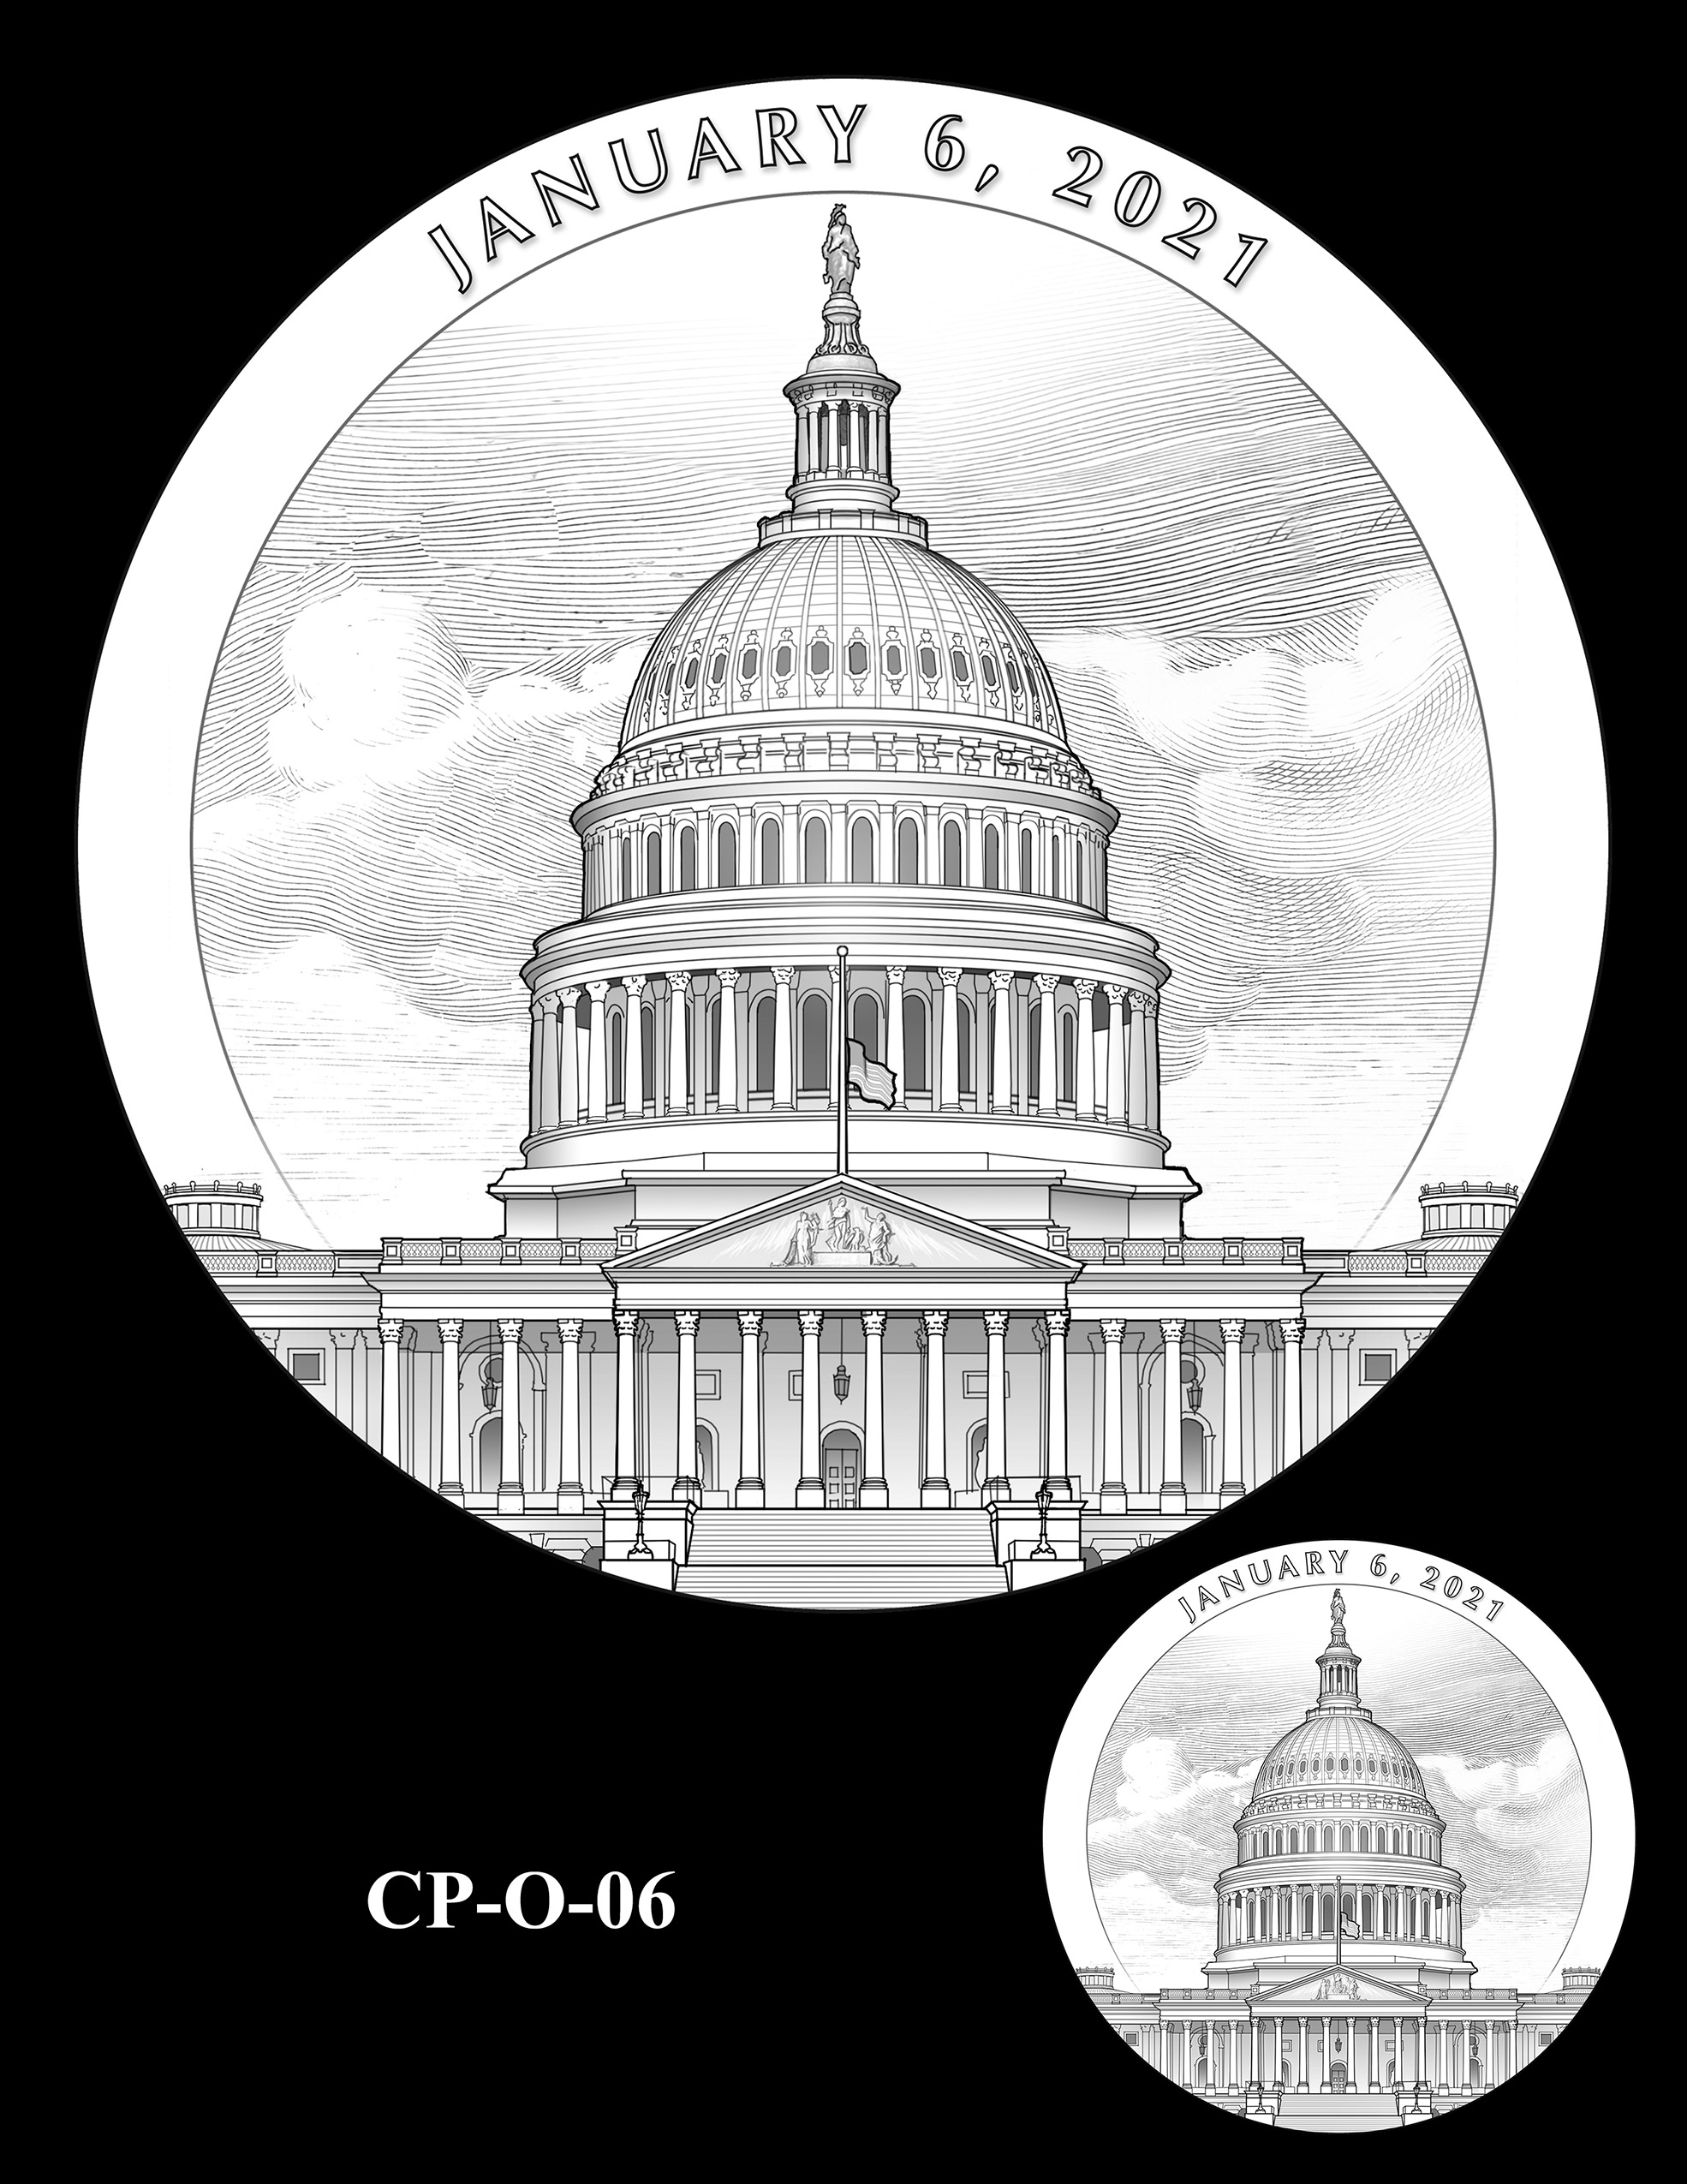 CP-O-06 -- Congressional Gold Medal for Those Who Protected the U.S. Capitol on January 6th 2021